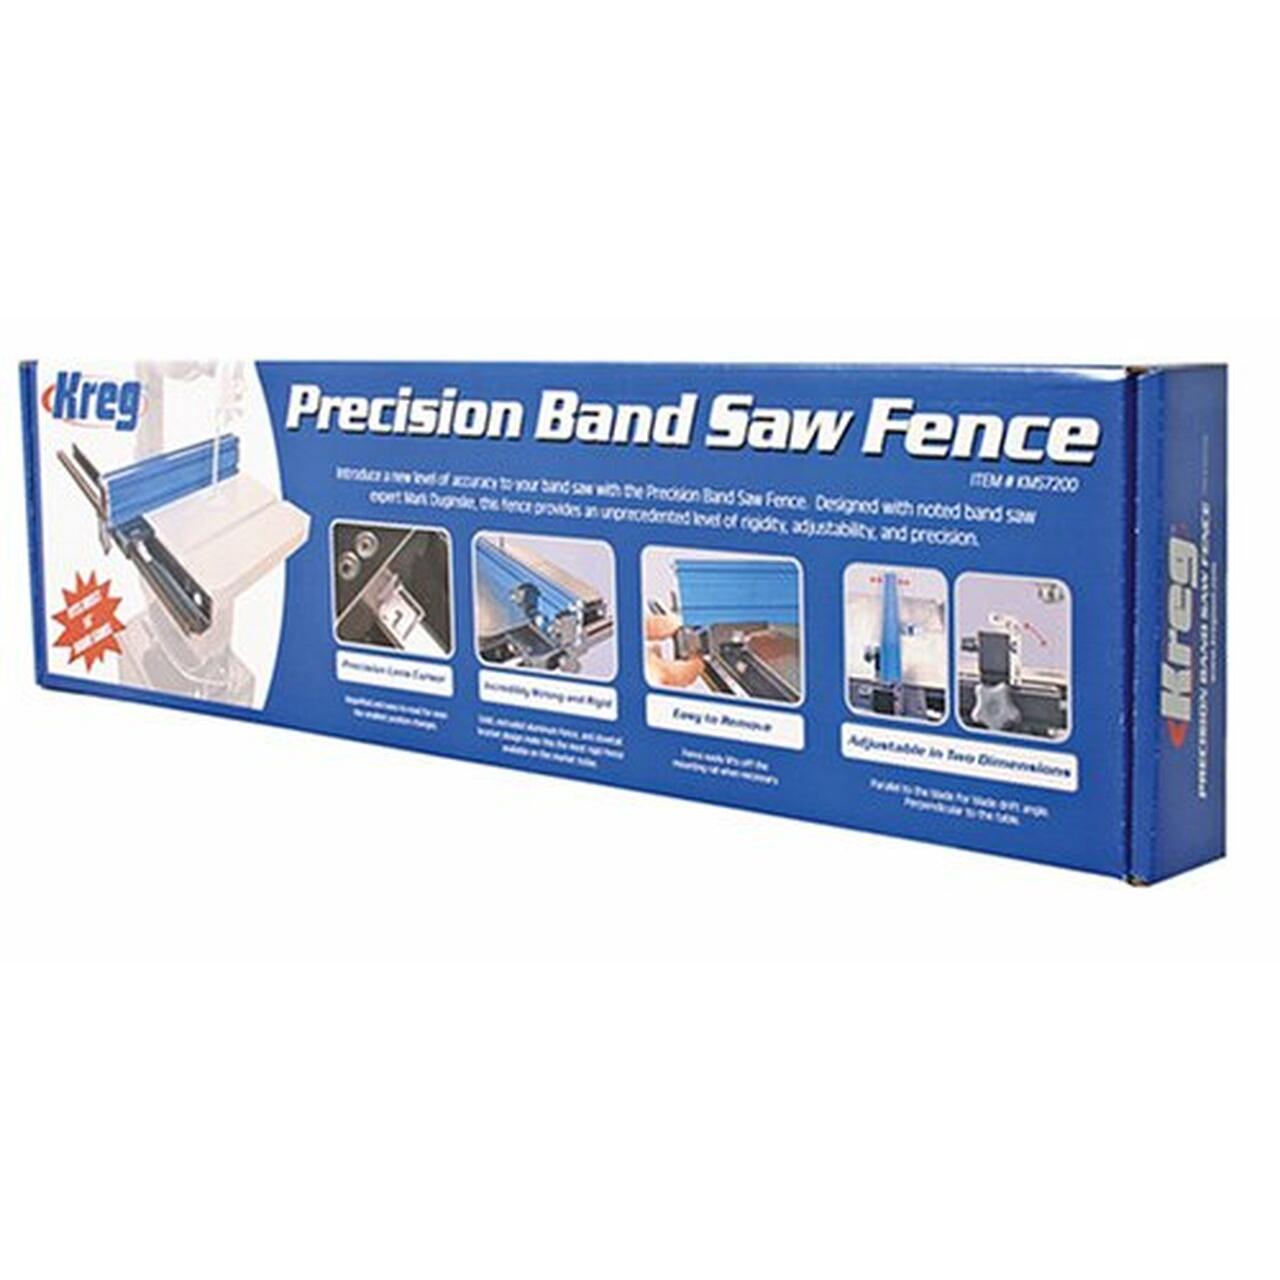 Kreg Precision Band Saw Fence KMS7200 Power Tool Services